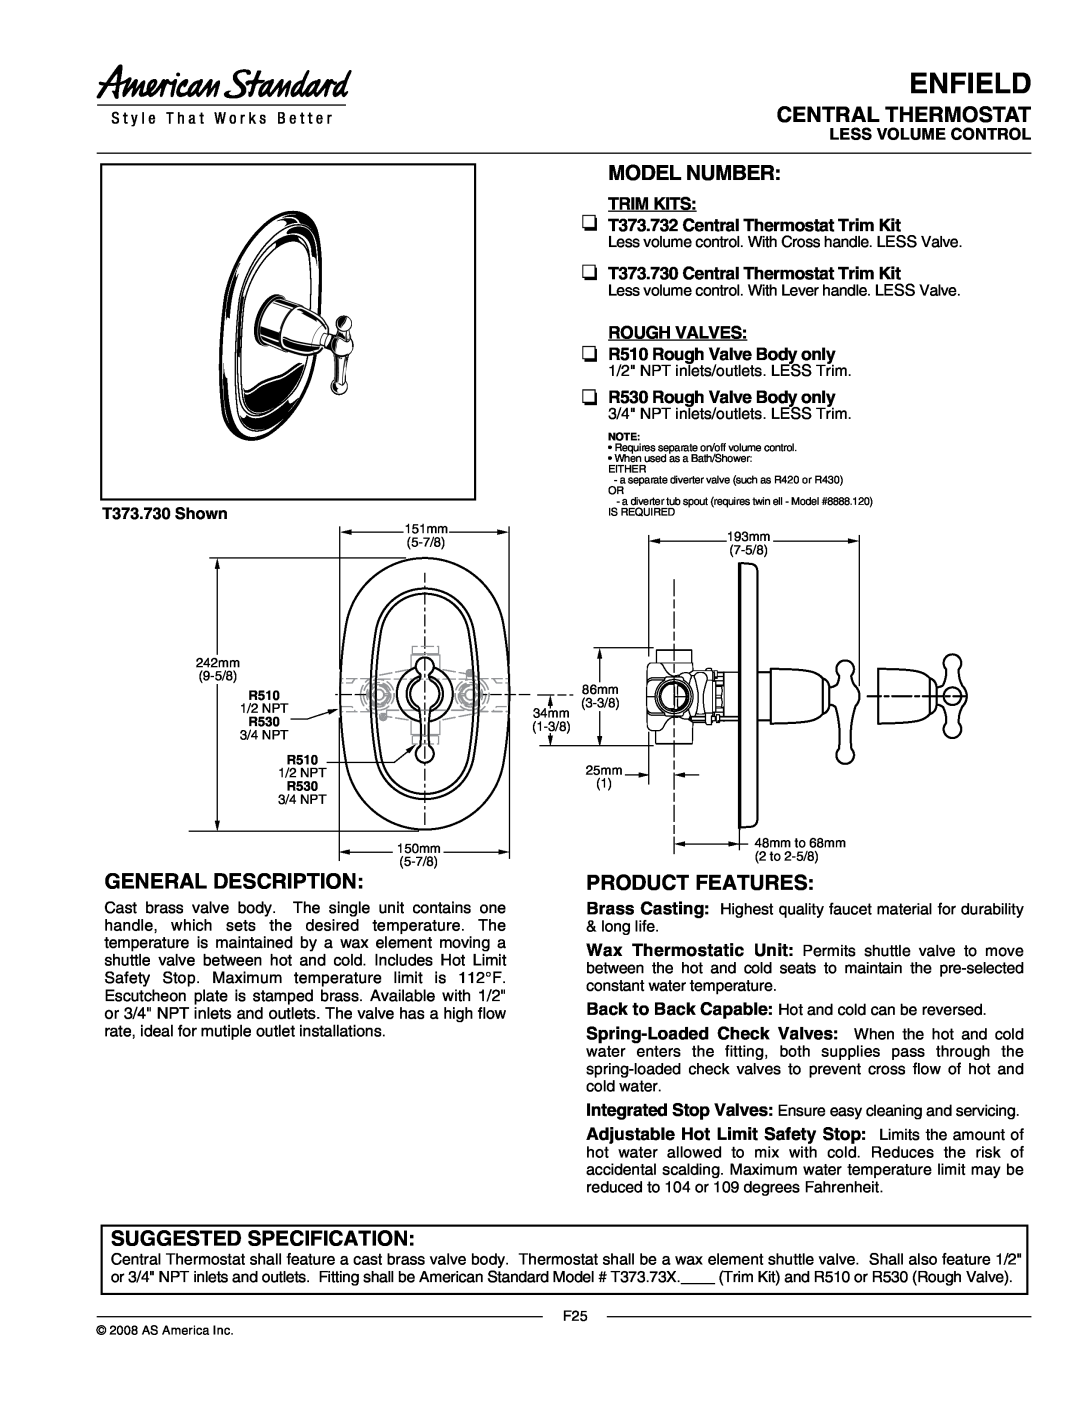 American Standard T373.730 manual Enfield, Central Thermostat, Model Number, General Description, Suggested Specification 